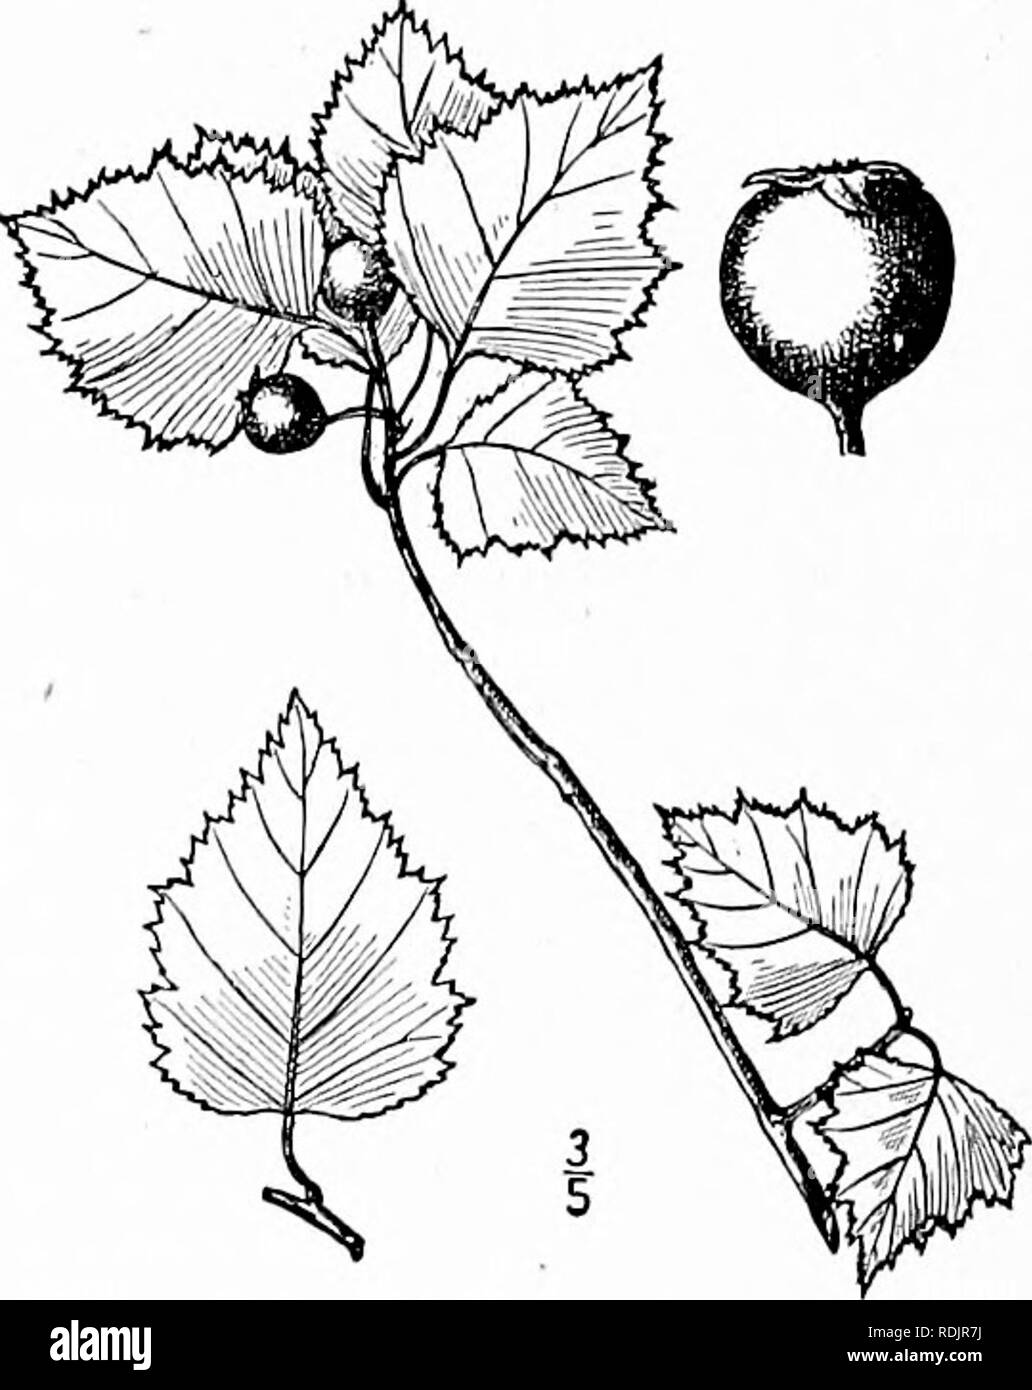 . An illustrated flora of the northern United States, Canada and the British possessions, from Newfoundland to the parallel of the southern boundary of Virginia, and from the Atlantic Ocean westward to the 102d meridian. Botany; Botany. 35. Crataegus populifolia Walter. Poplar-leaved Haw. Fig. 2369. Crataegus populifolia Walt. Fl. Car. 147. 1788. A shrub or small tree, about 15° high, with ascending and spreading branches forming a round crown. Spines slender, '-2' long; leaves deltoid-ovate or oblong-ovate, l'-2l' long, ¥-2' wide, serrate or doubly serrate with acute lobes, acute at the apex Stock Photo